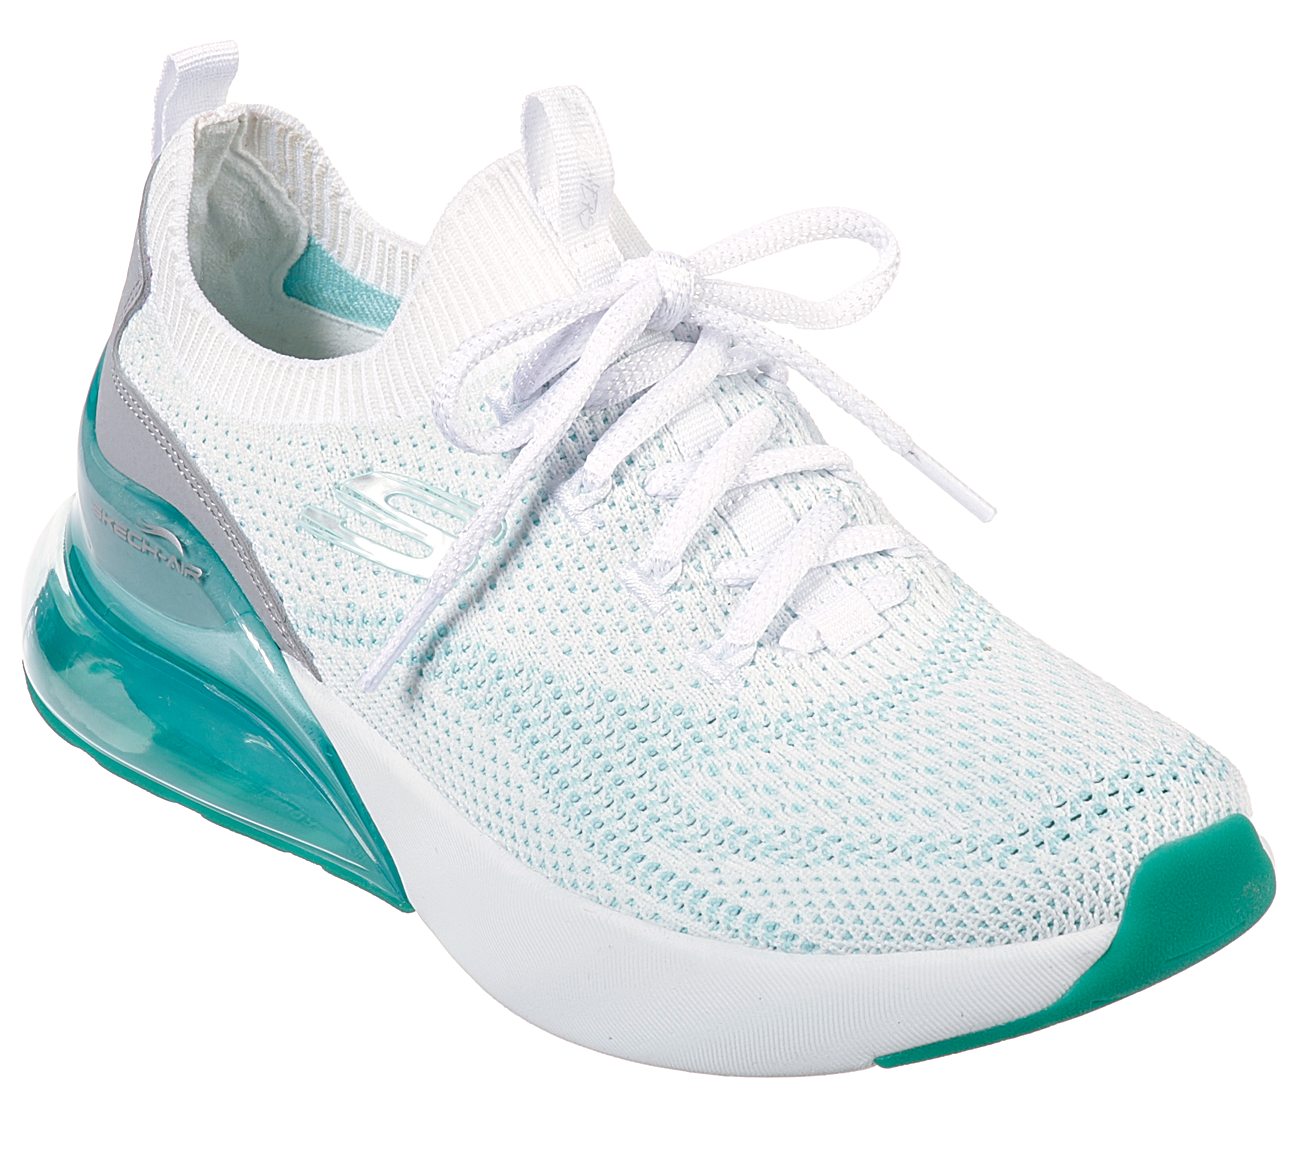 SKECH-AIR STRATUS, WHITE/TURQUOISE Footwear Lateral View